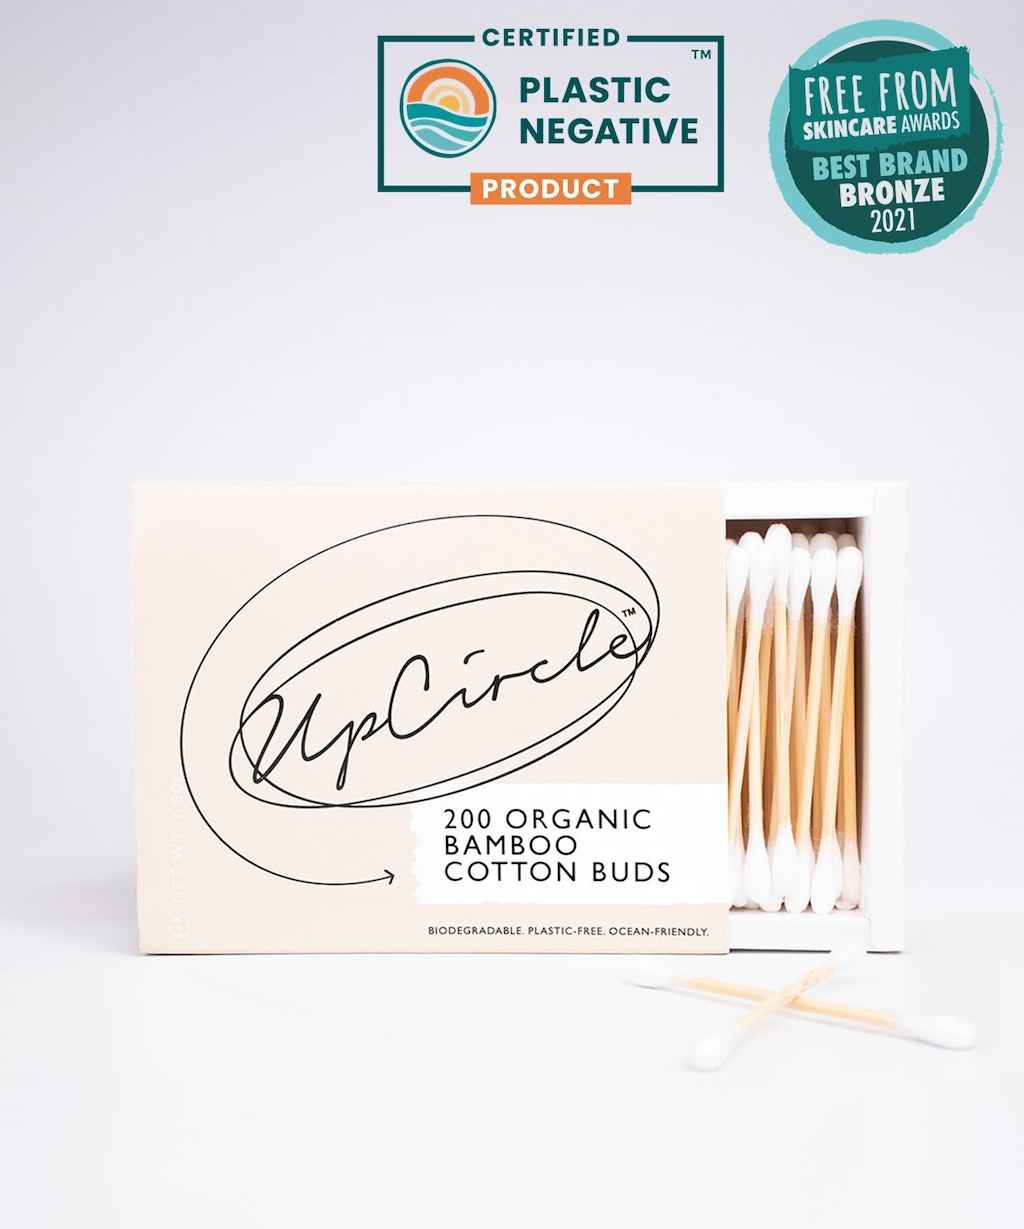 Upcircle Organic Bamboo Cotton Buds. Plastic free buds. The box of 200 is shown slid open with some of the buds showing. Badges saying it is a certified plastic negative produce and a Bronze in the Free From awards are shown.